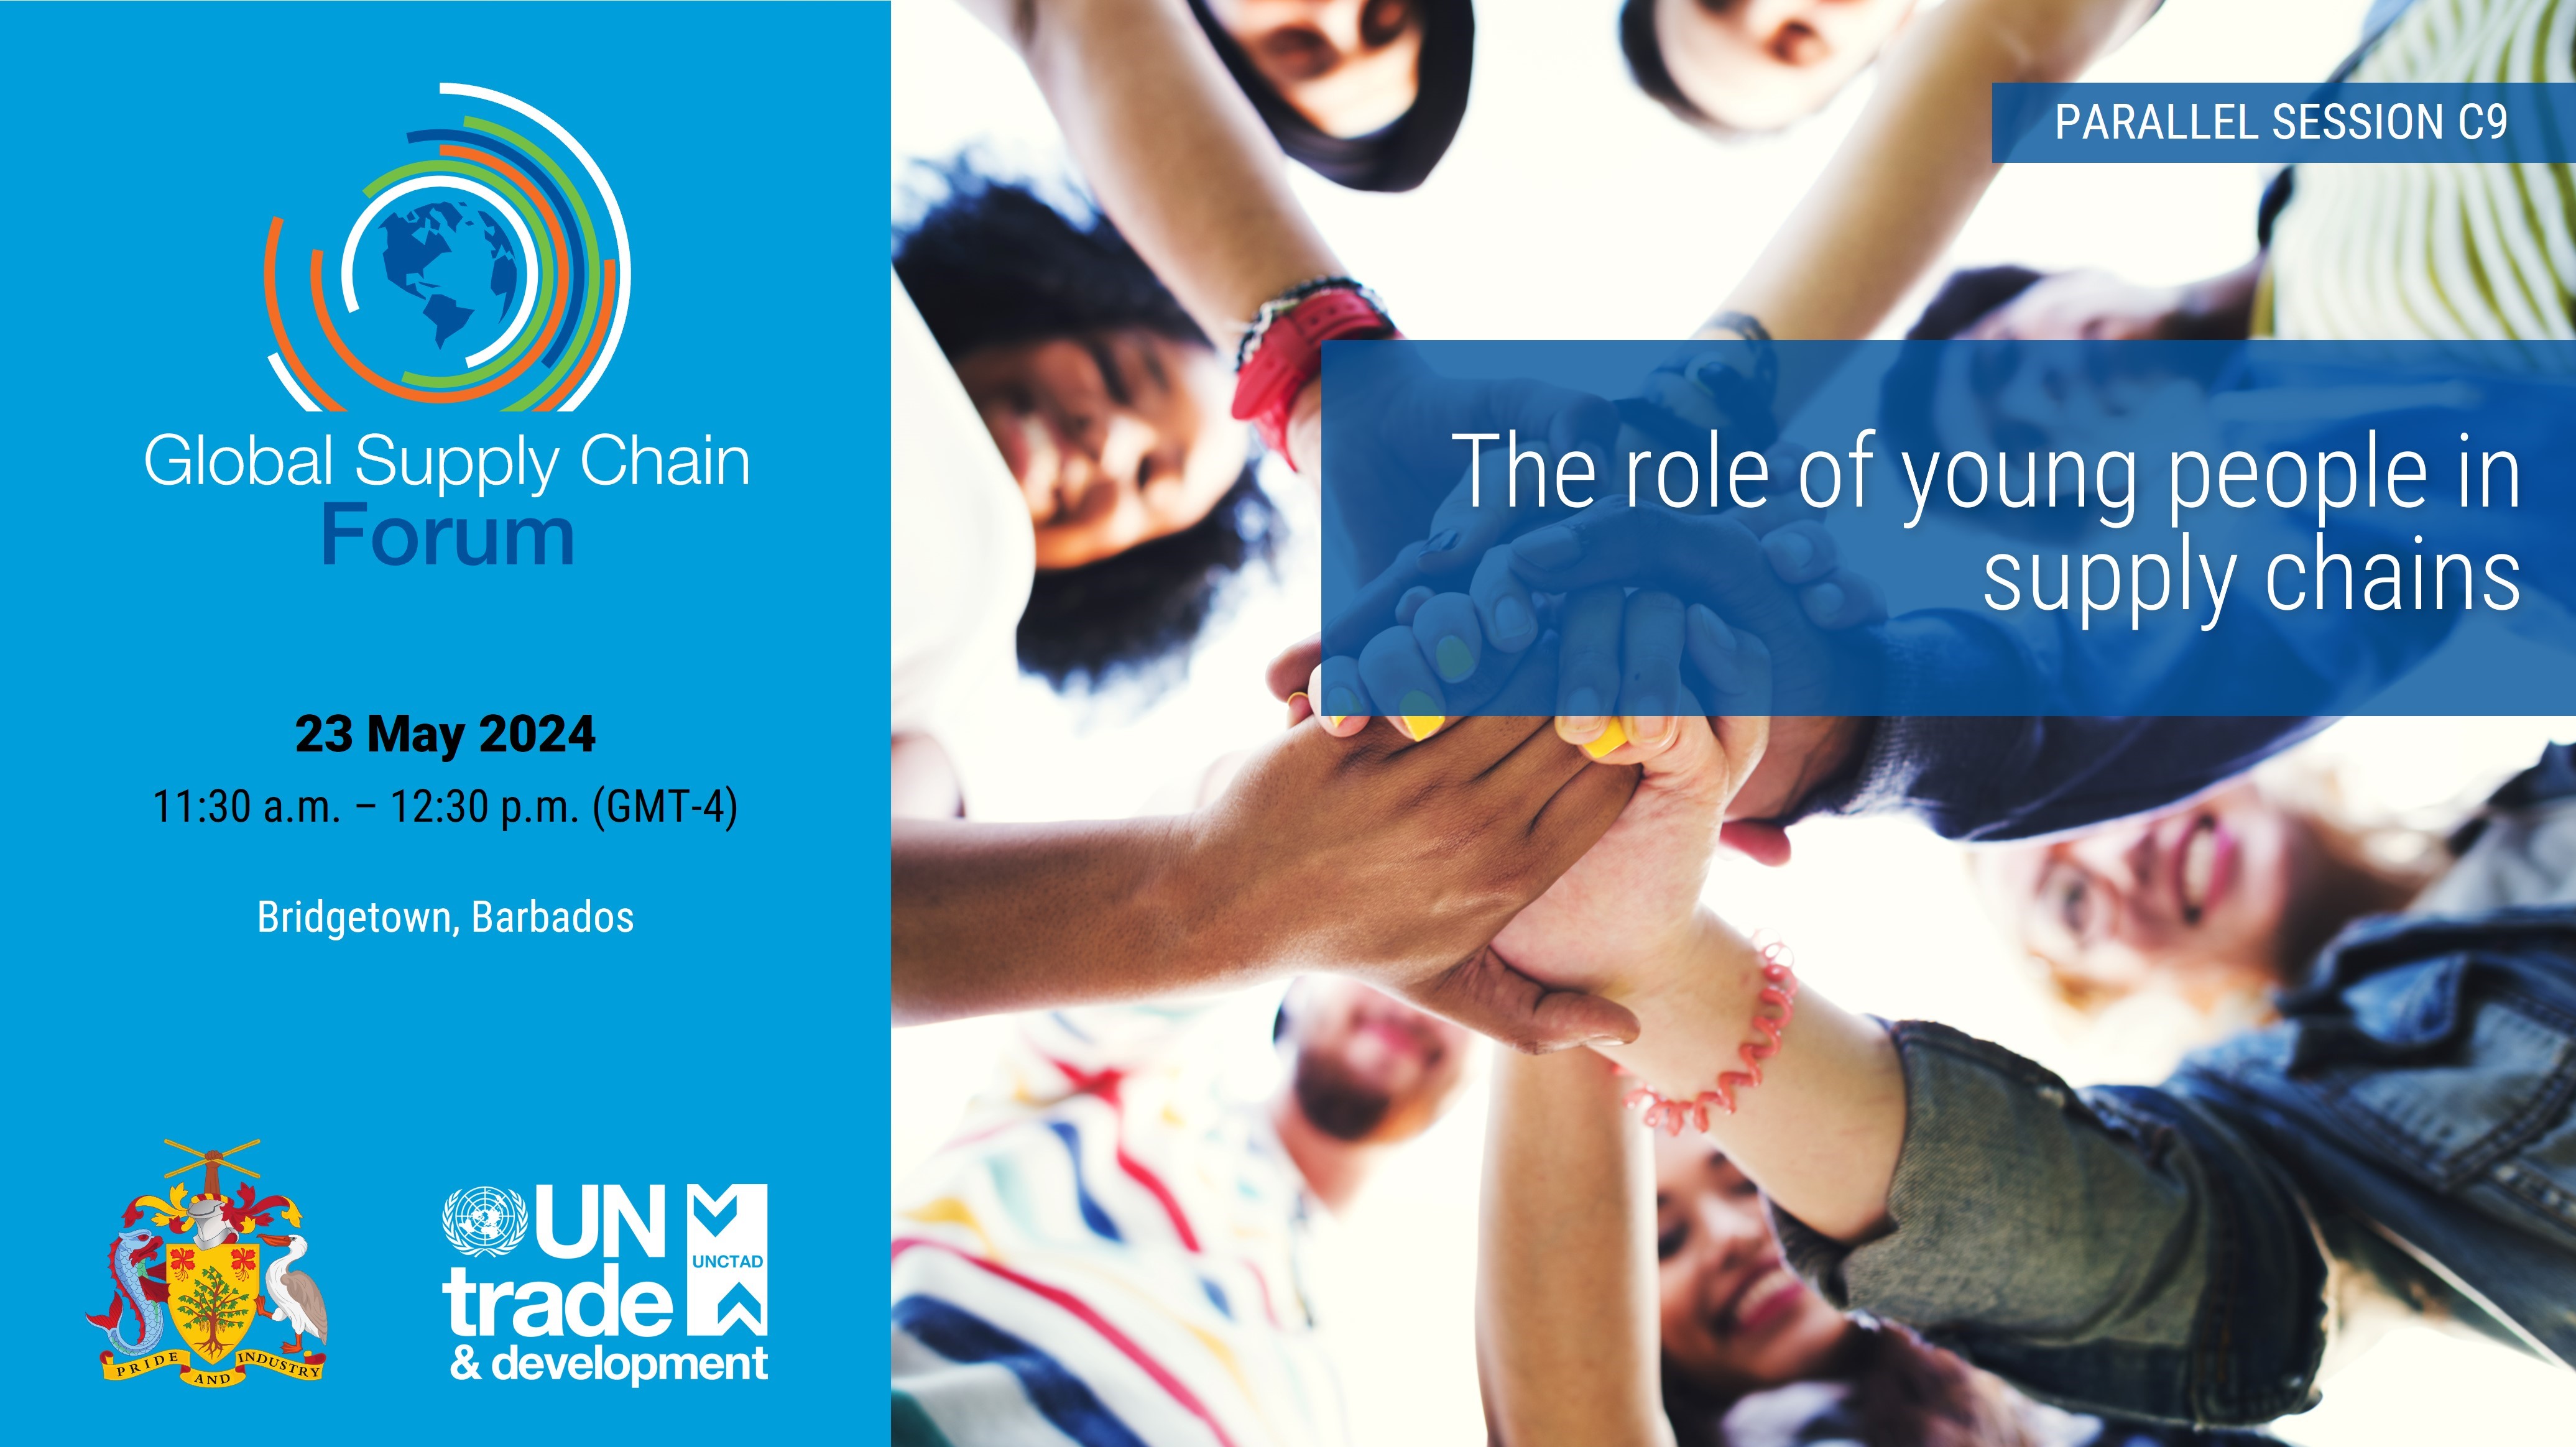 The role of young people in supply chains